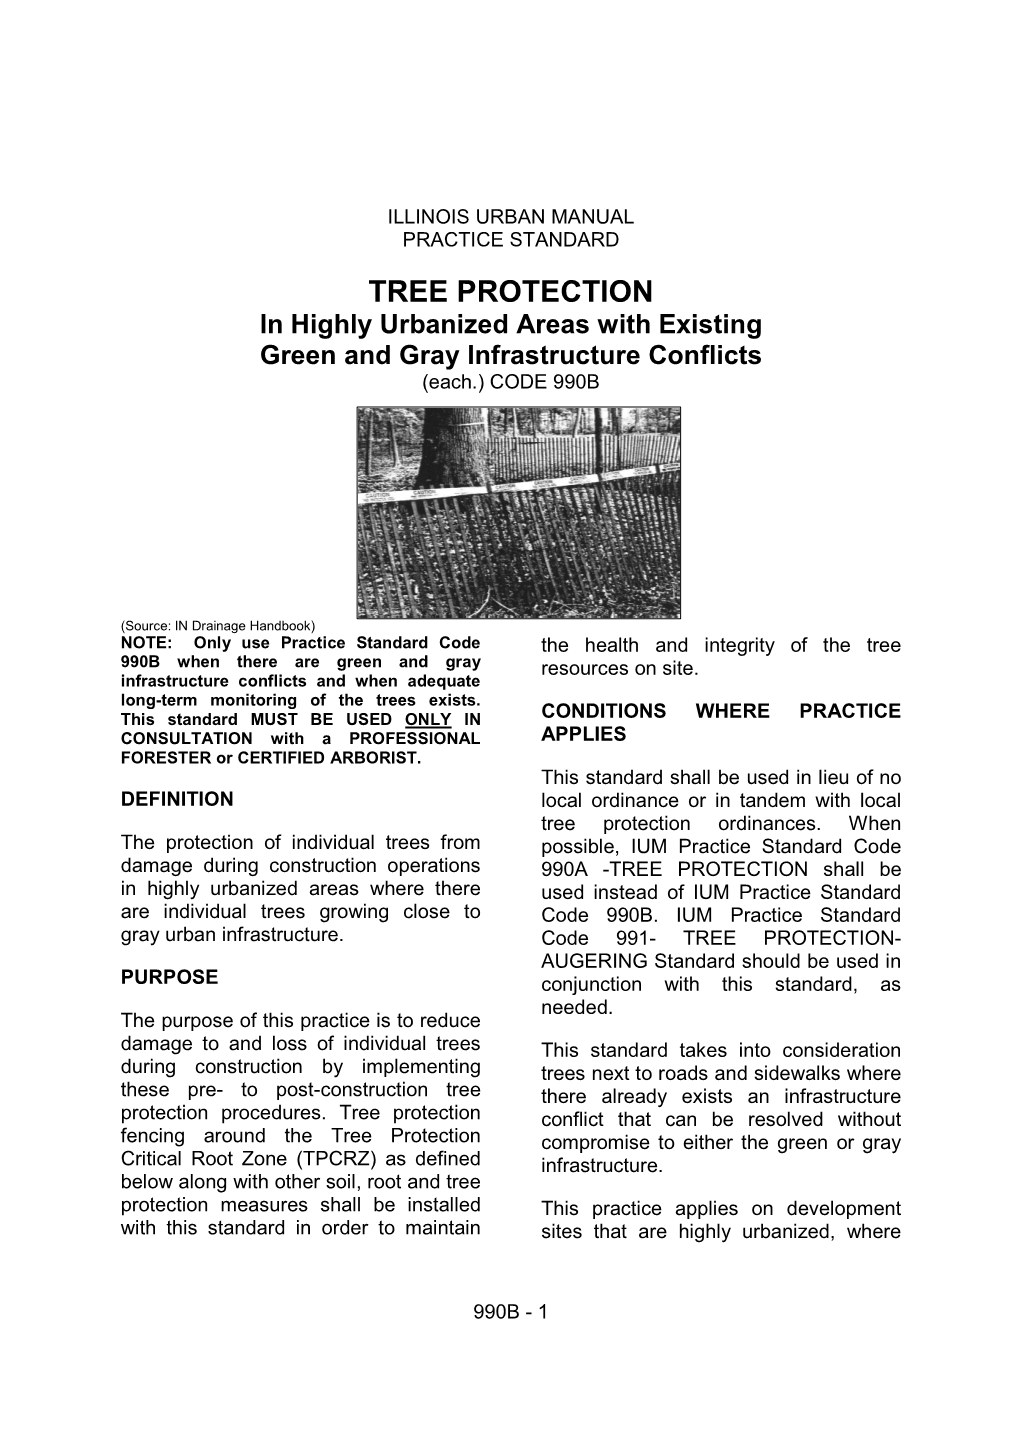 TREE PROTECTION in Highly Urbanized Areas with Existing Green and Gray Infrastructure Conflicts (Each.) CODE 990B